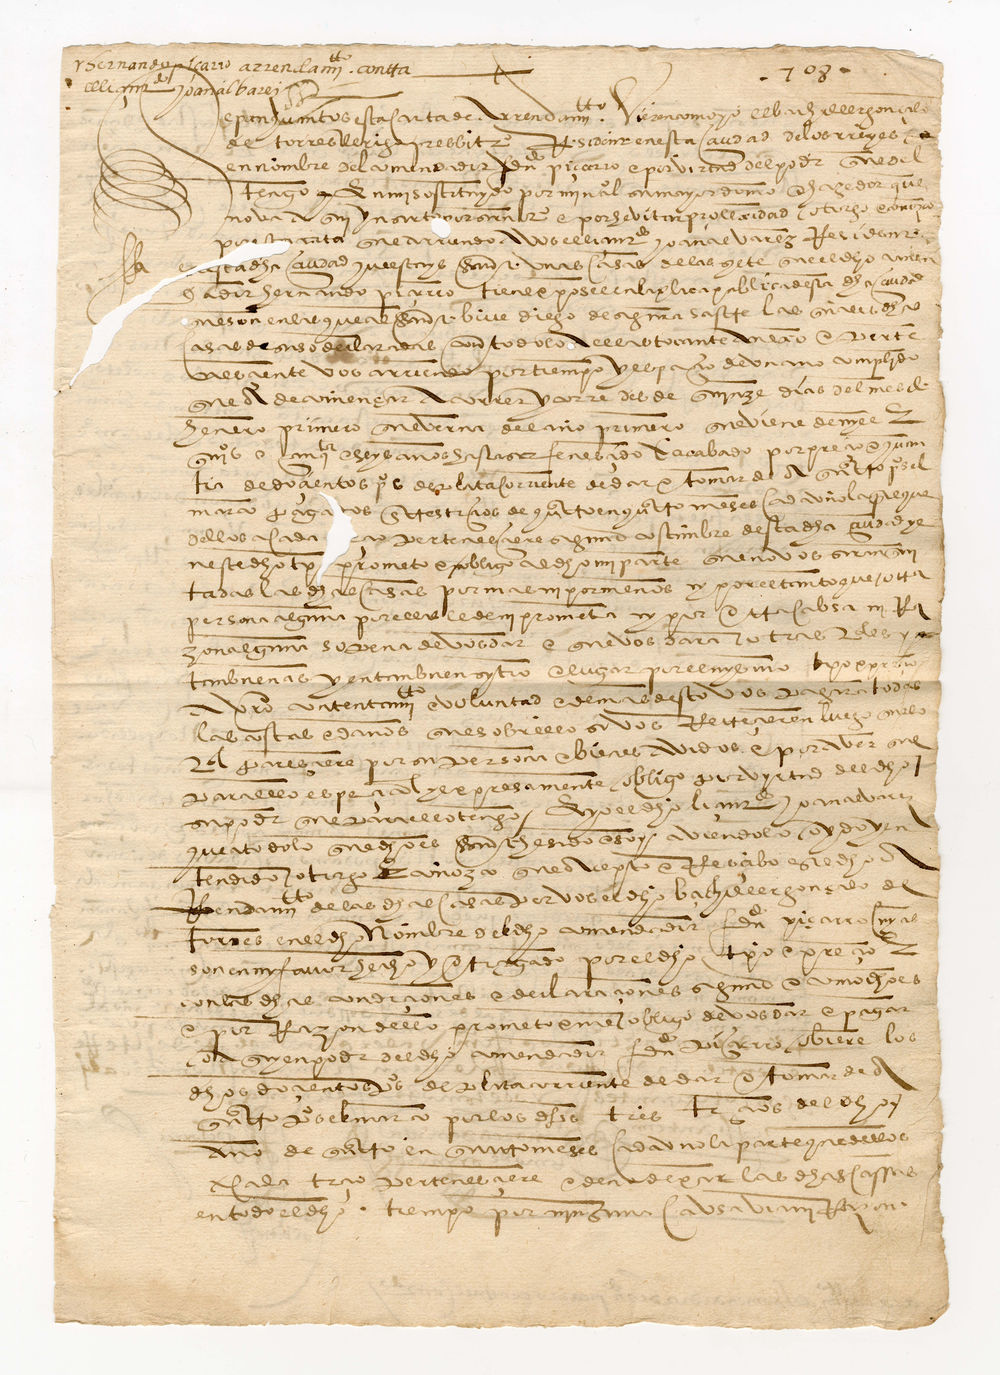 Rental contract relating to a dwelling in Lima between the converso physician Juan Alvarez and Hernando Pizarro.